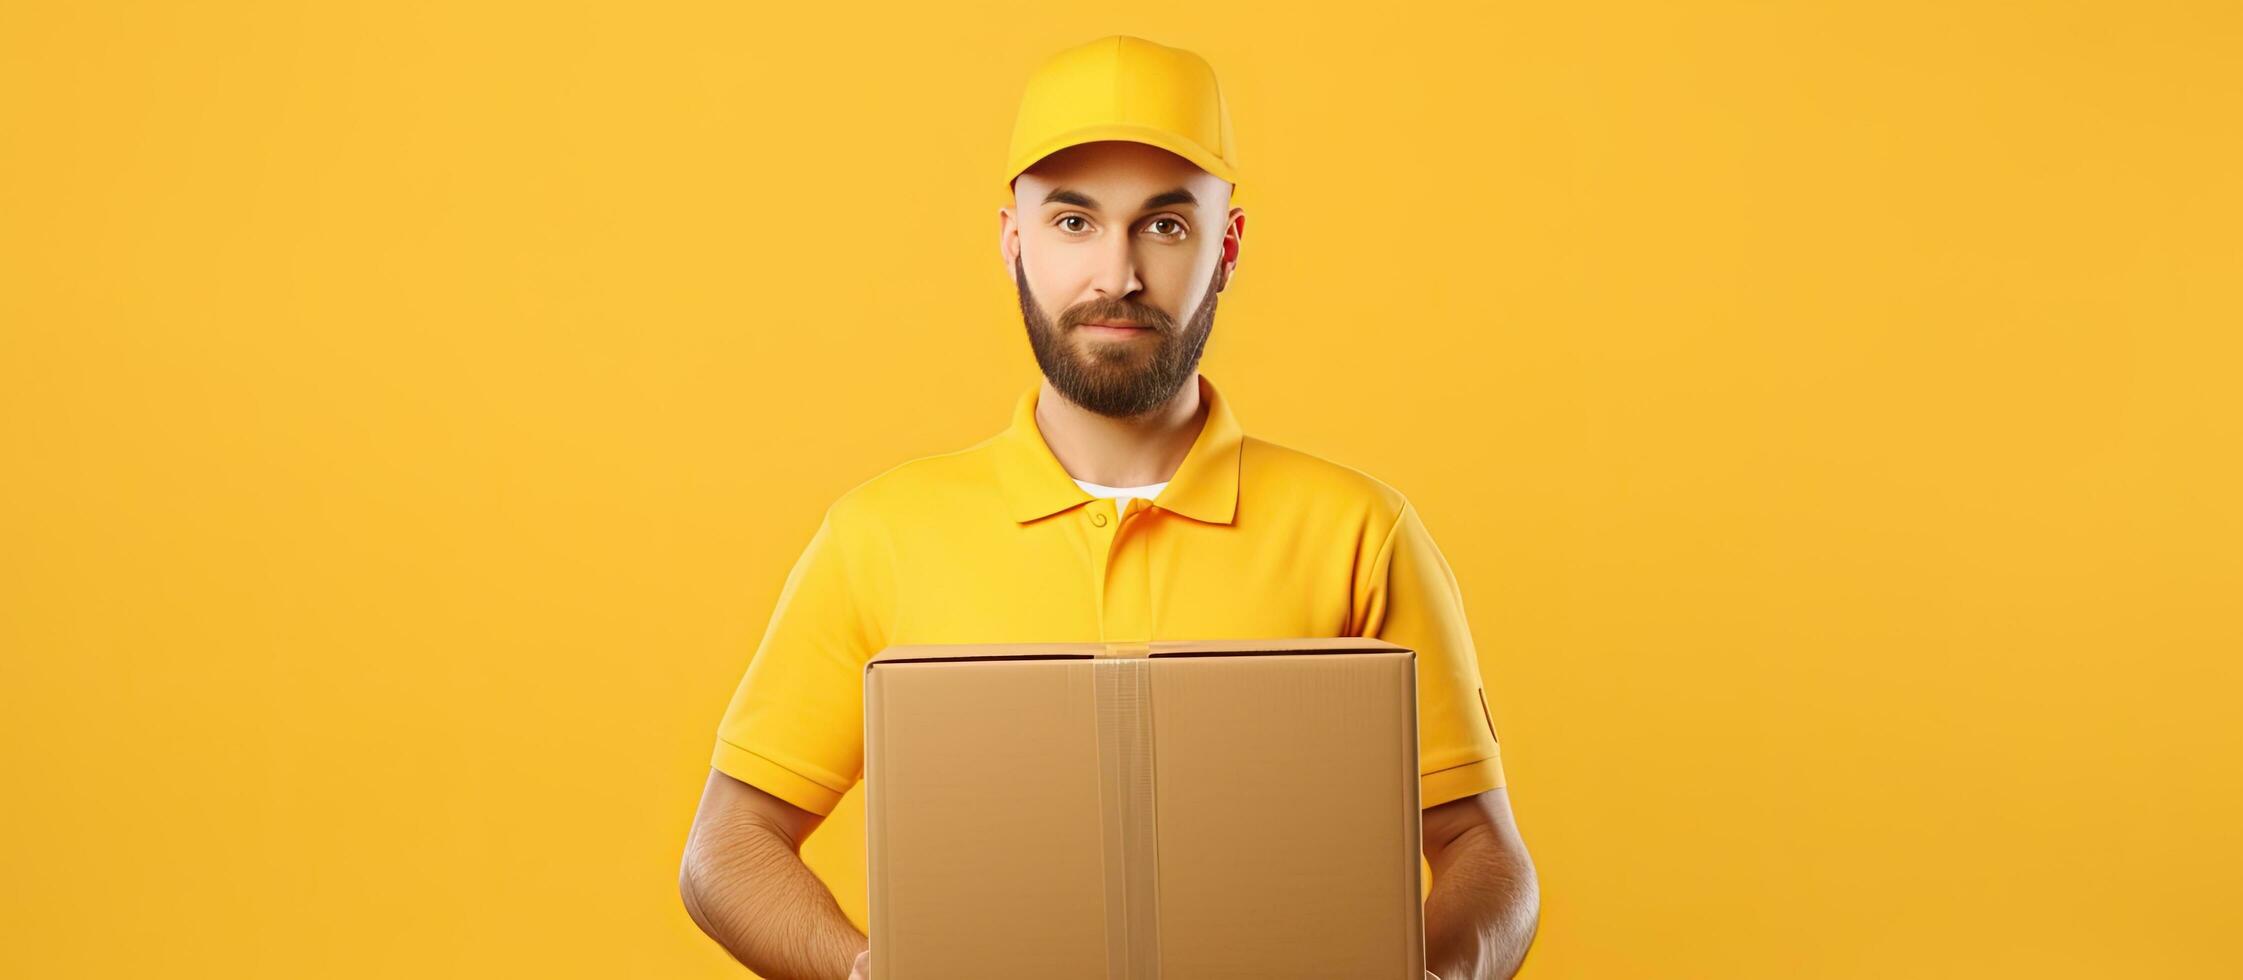 Courier holding big boxes on yellow background with room for text photo